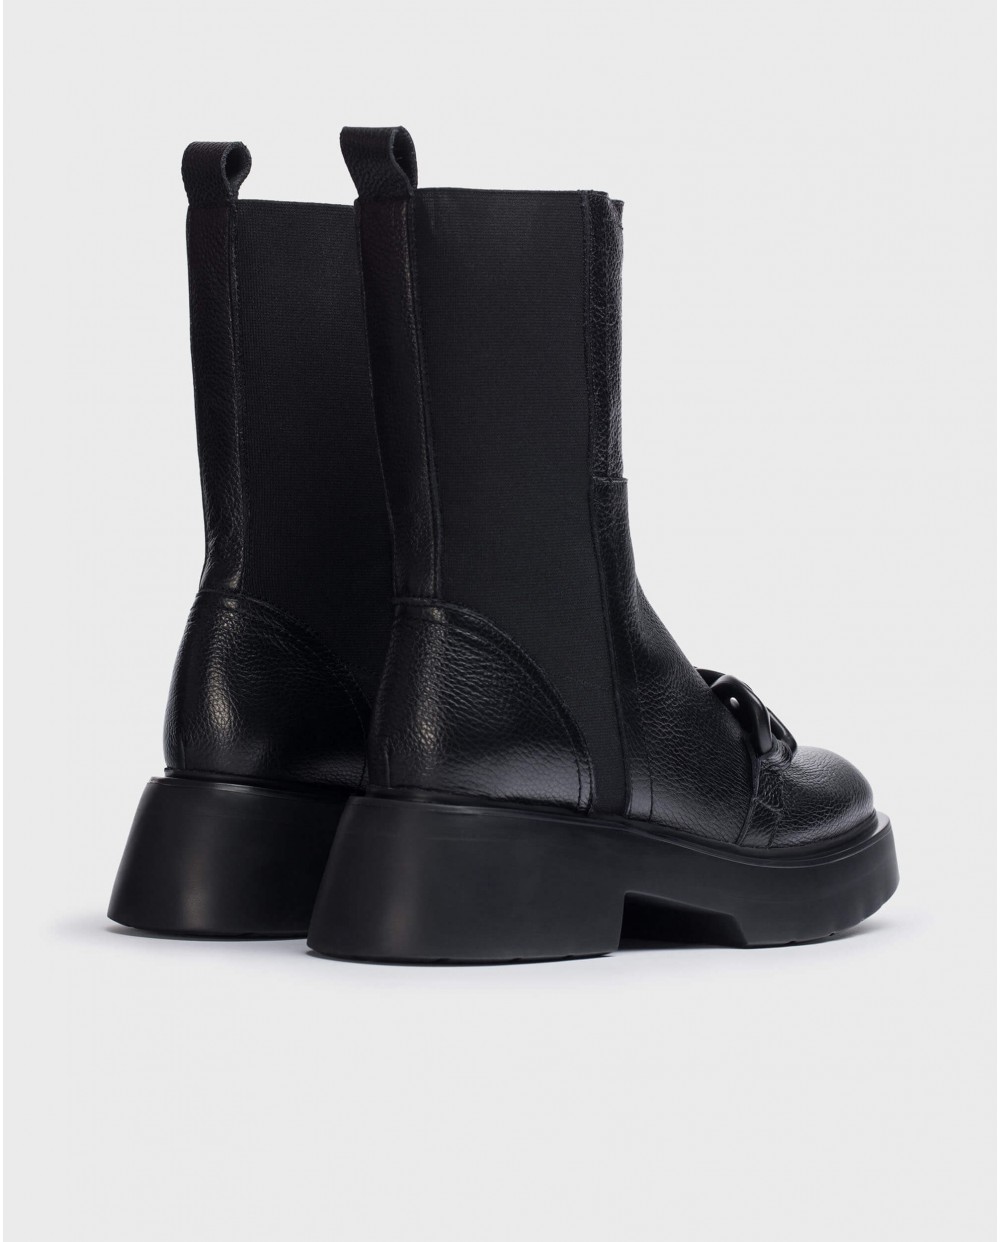 Wonders-Boots-Black Aiko Ankle Boot